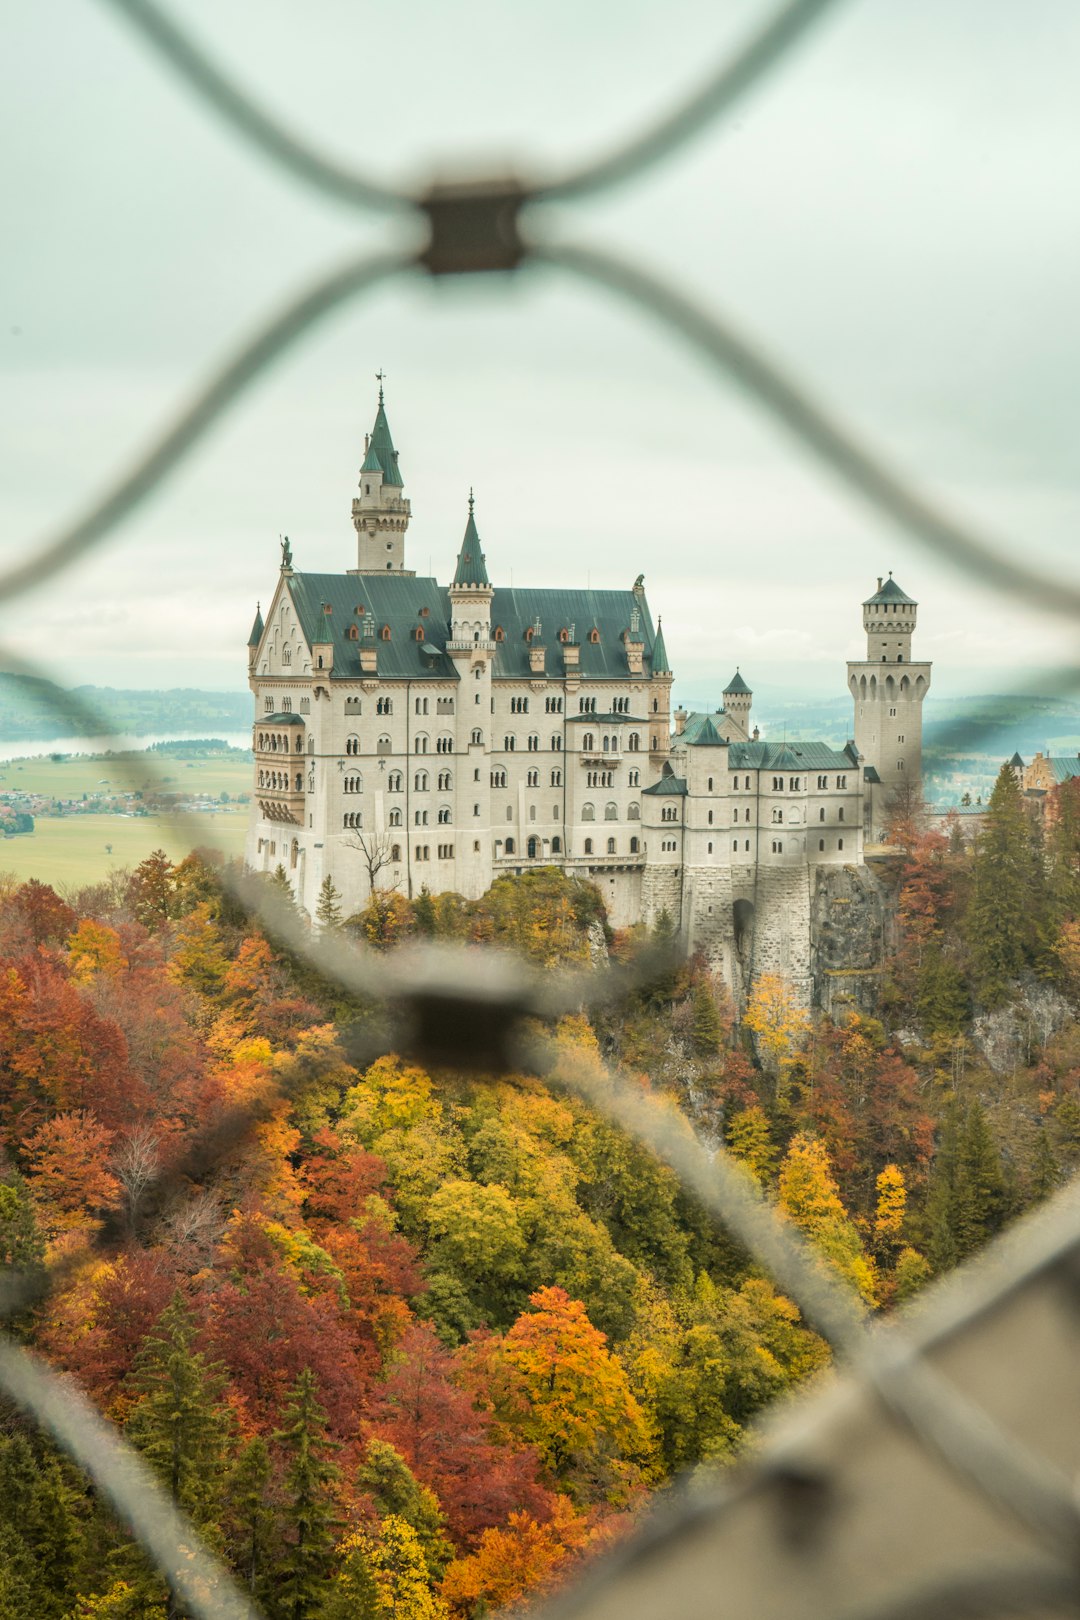 Travel Tips and Stories of Schloss Neuschwanstein in Germany